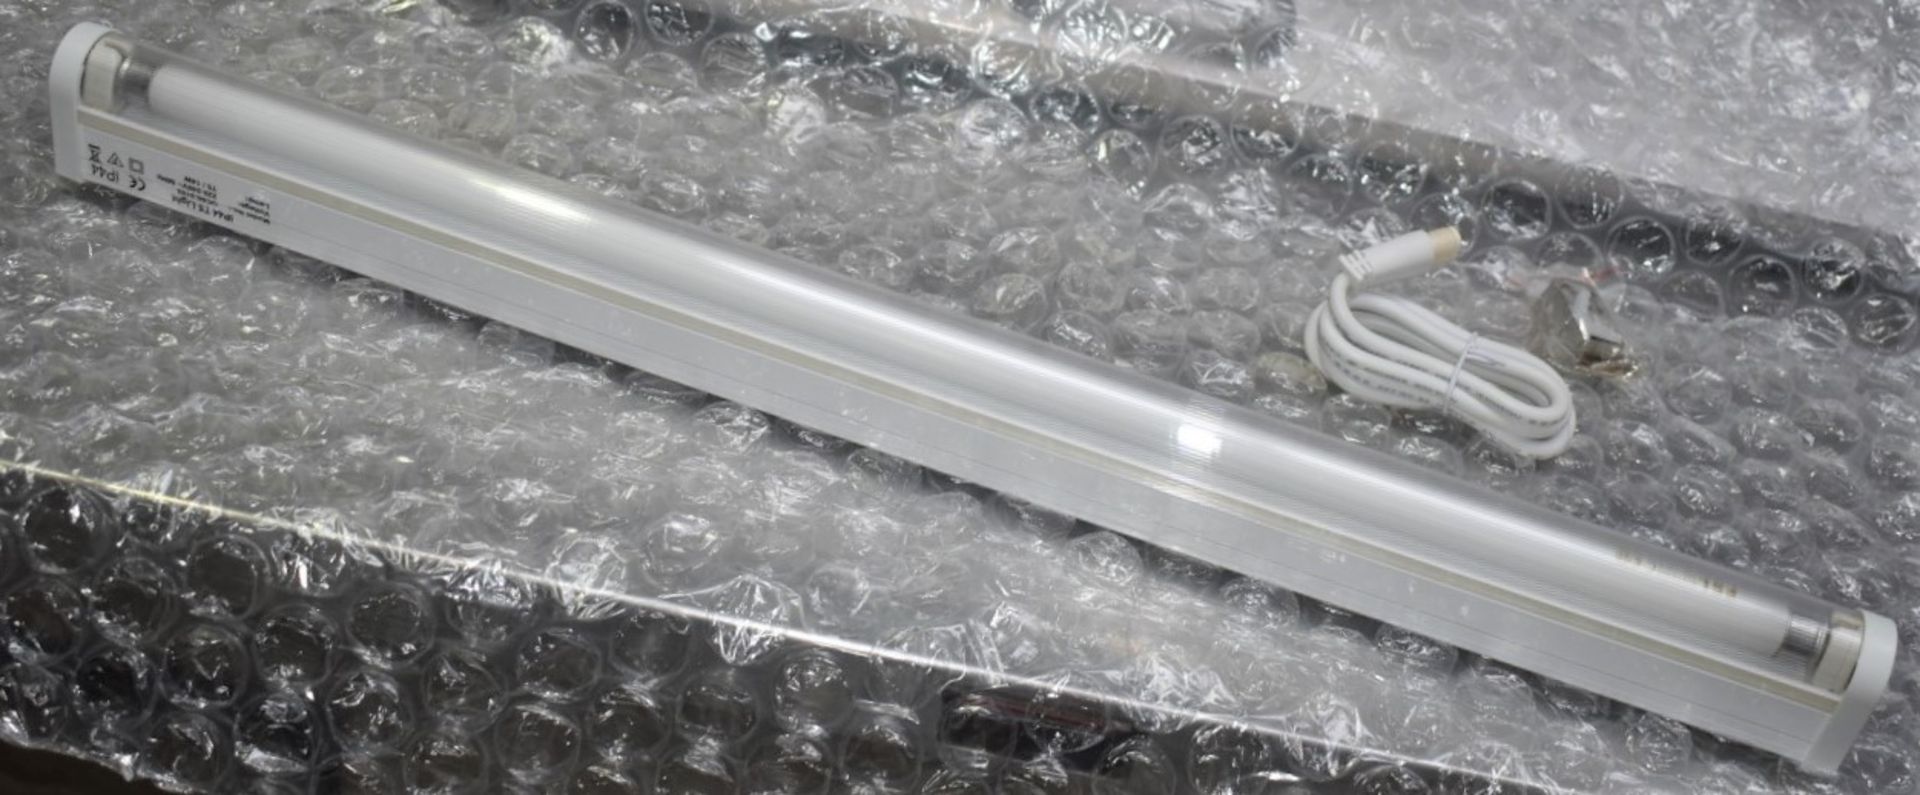 10 x Bathroom Light Fittings - IP44 Waterproof T5 14w Fluorescent Lights With Built-In Electronic - Image 11 of 11